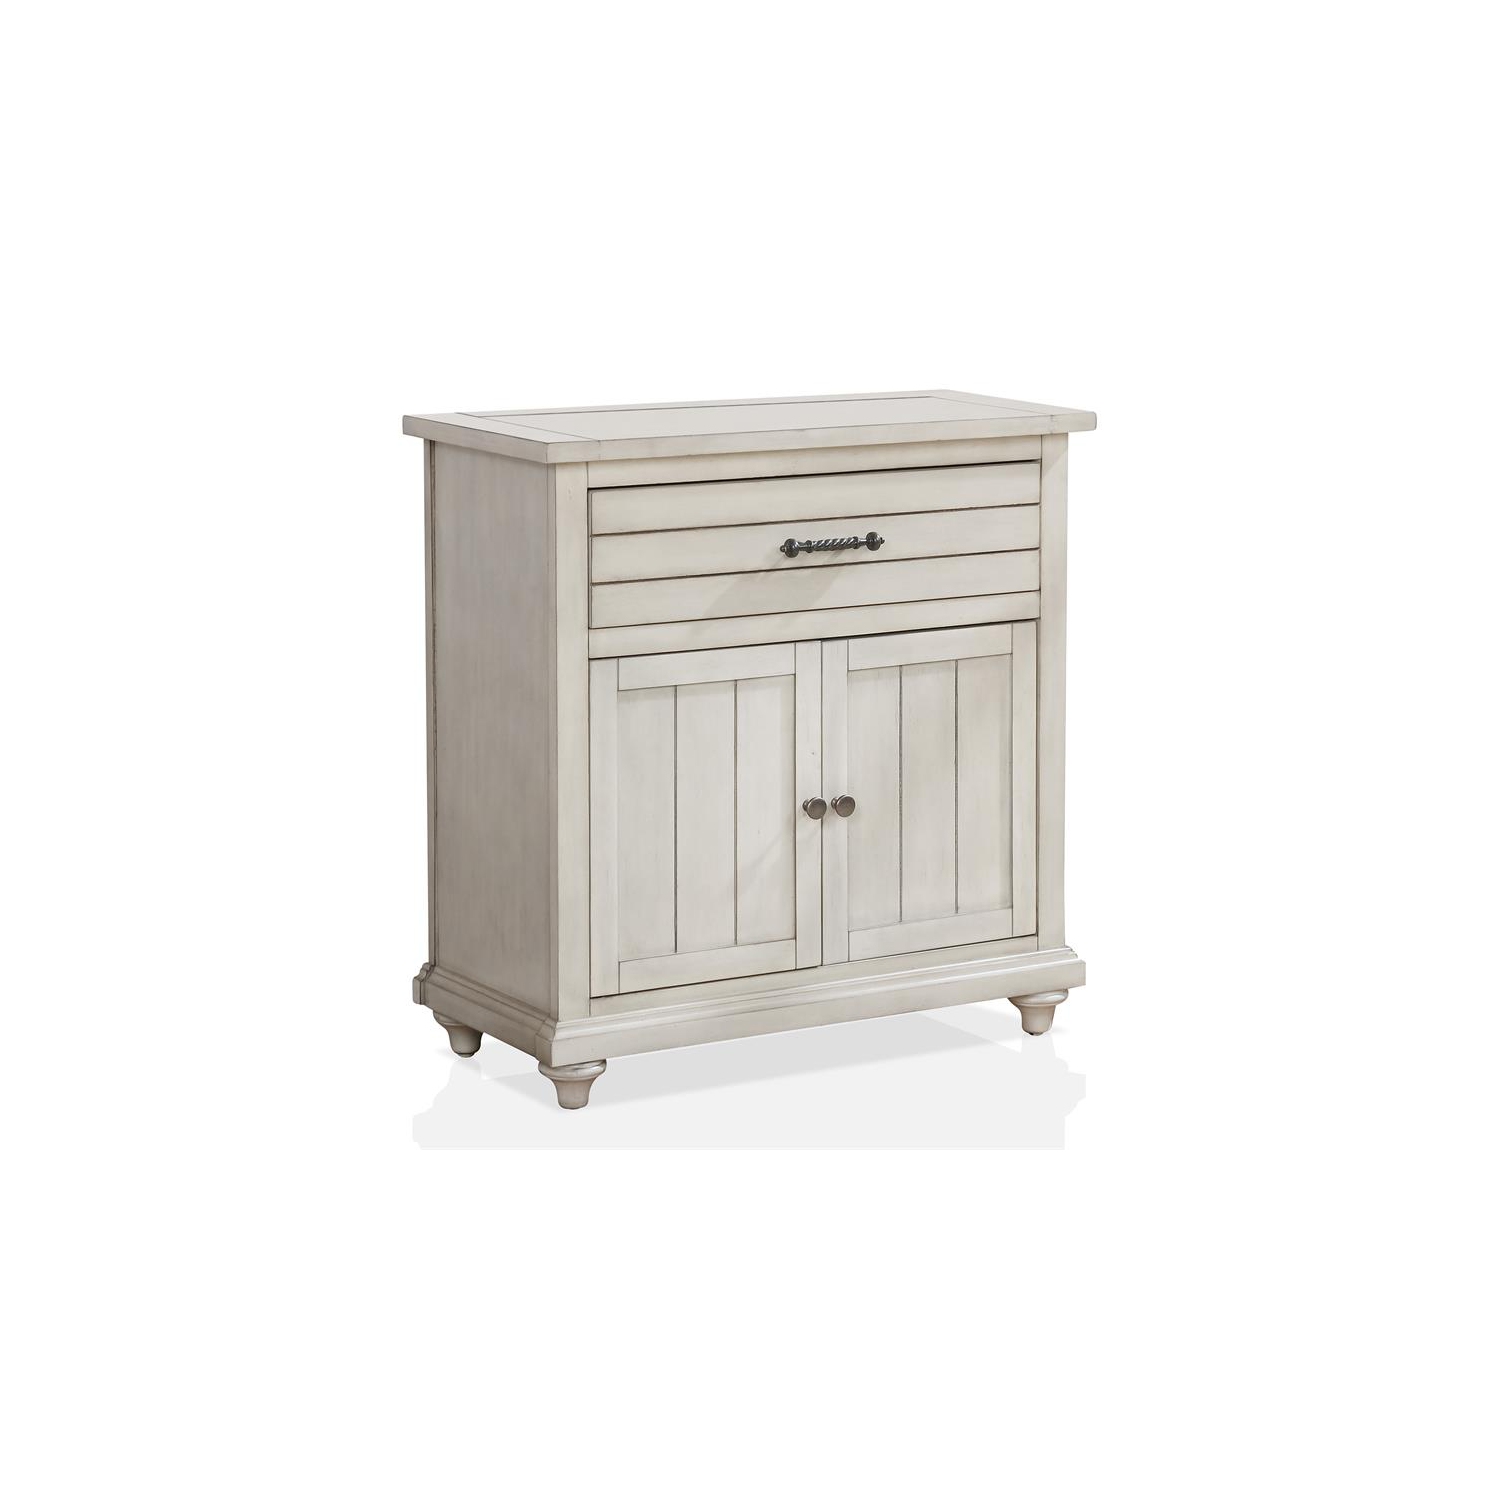 Furniture of America Bombas Wood 1-Drawer Hallway Cabinet in Antique White